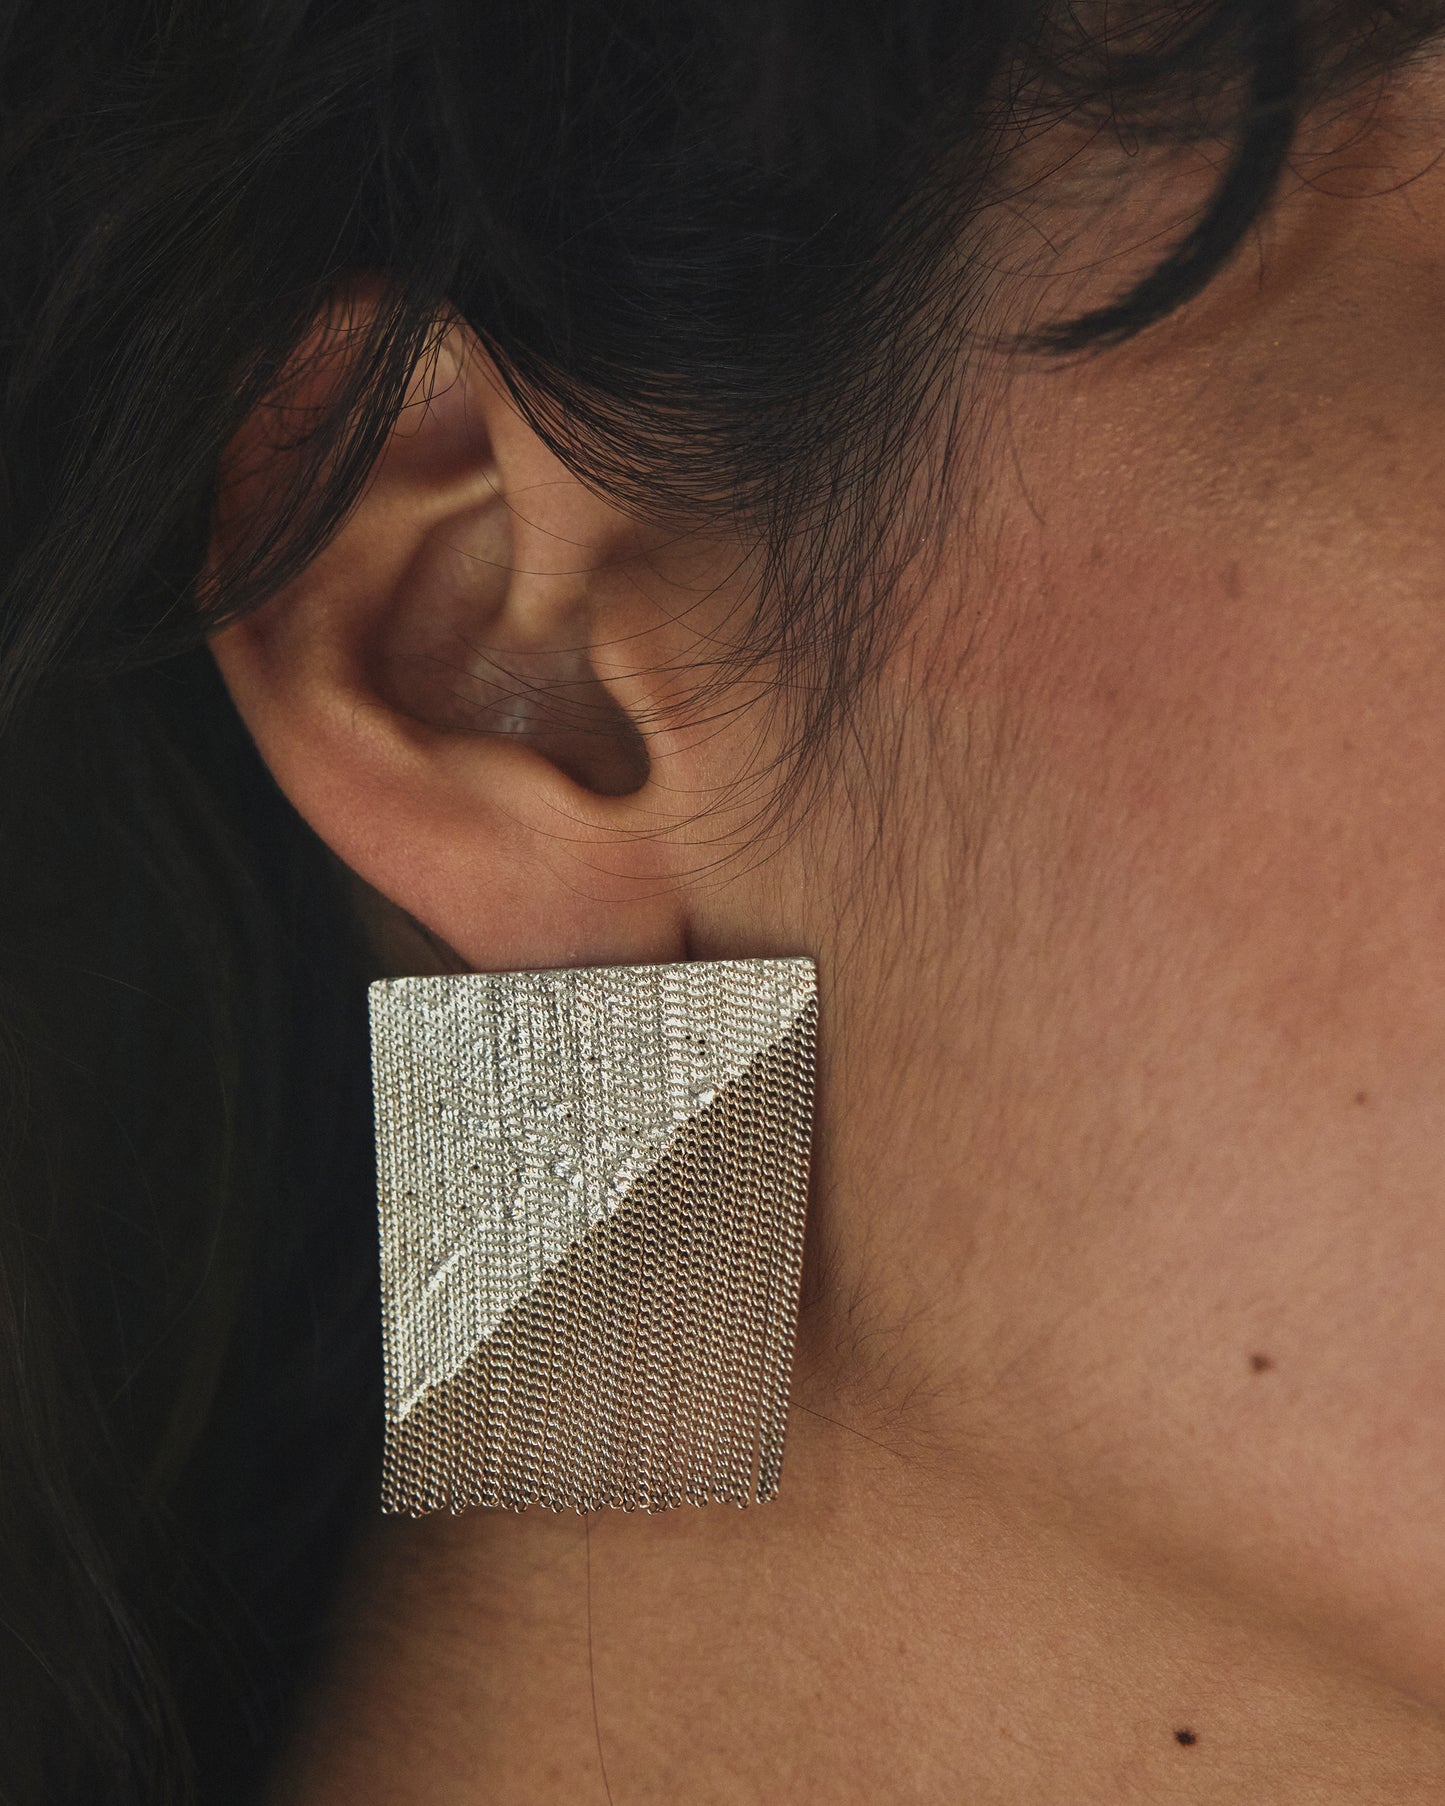 Large square earrings, with a diagonal line that separates chain from solid for a unique 70's inspired style.